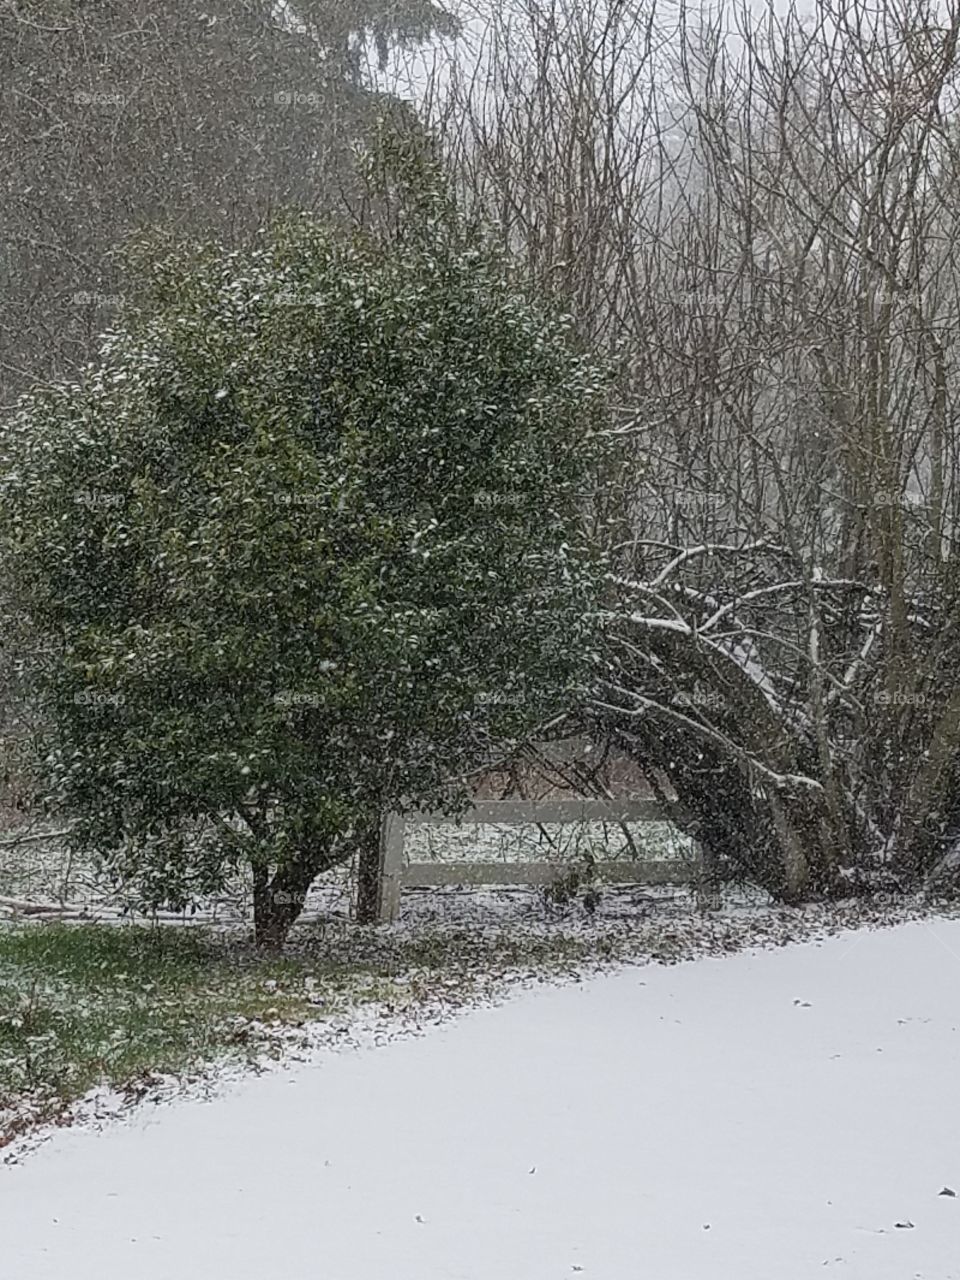 Snow in the fig tree